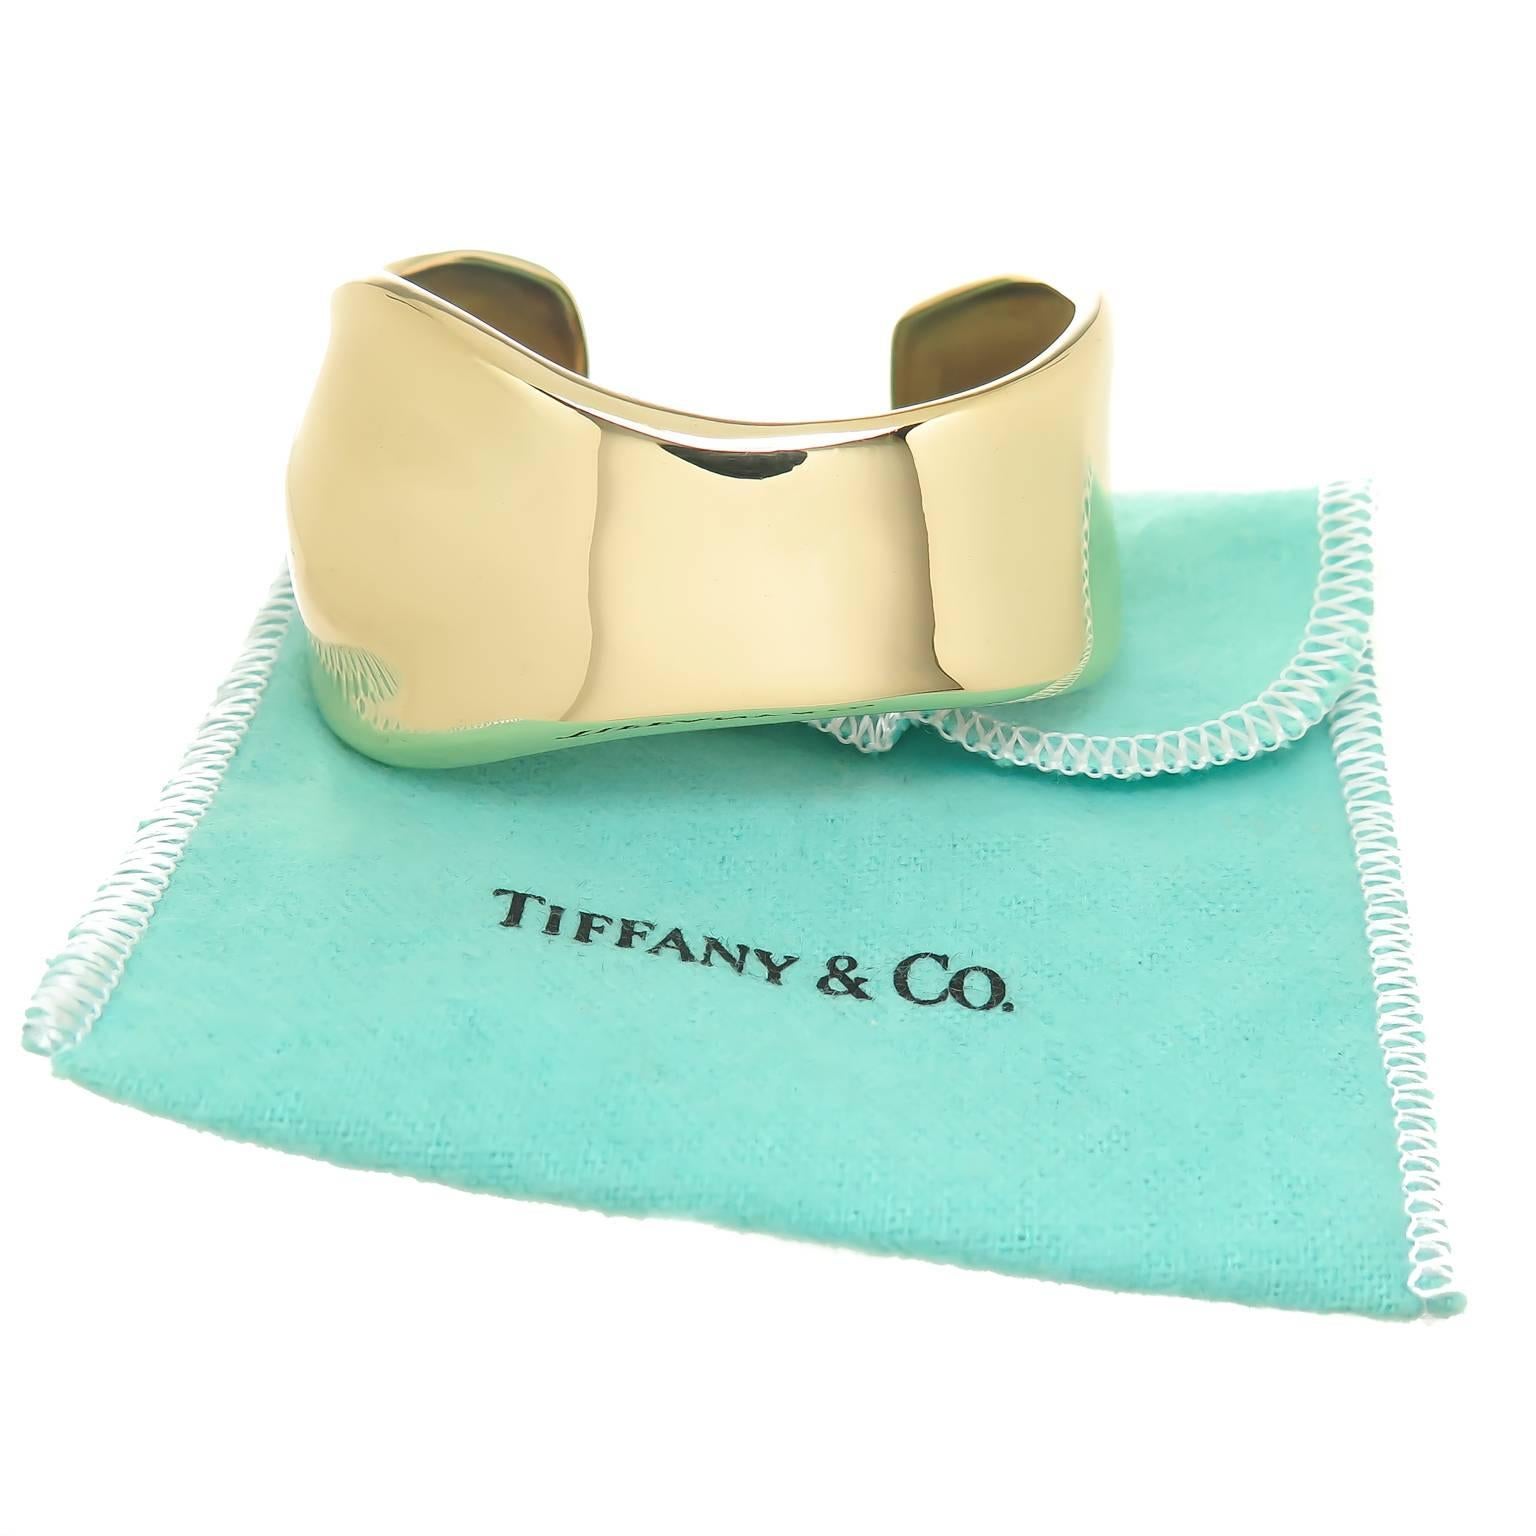 Circa 1990 Elsa Peretti for Tiffany & Company 18K Yellow Gold Bone Cuff Bracelet. measuring 1 3/8 inch wide and having an opening that measures 1 inch. Weighing 75.5 Grams and comes in the original Tiffany Felt Pouch. 